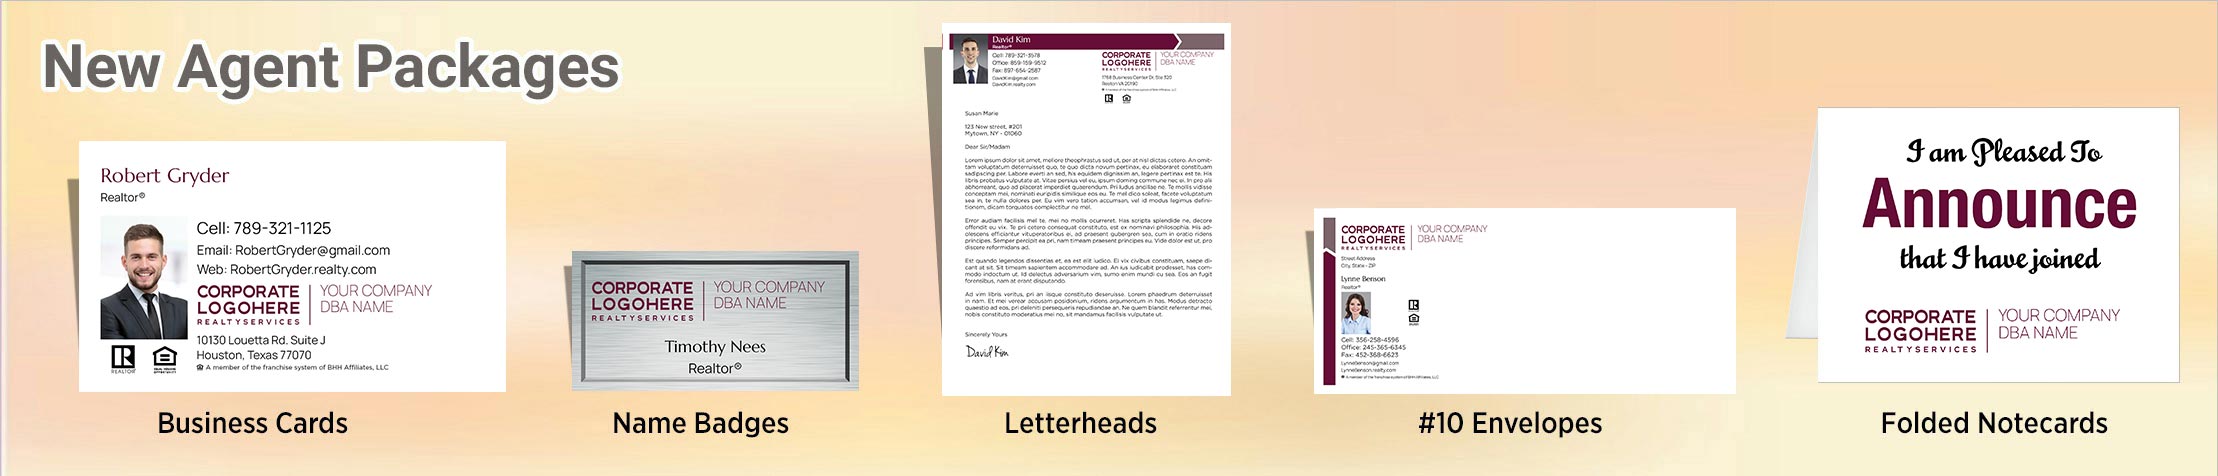 Berkshire Hathaway Real Estate Gold, Silver and Bronze Agent Packages - personalized business cards, letterhead, envelopes and note cards | BestPrintBuy.com